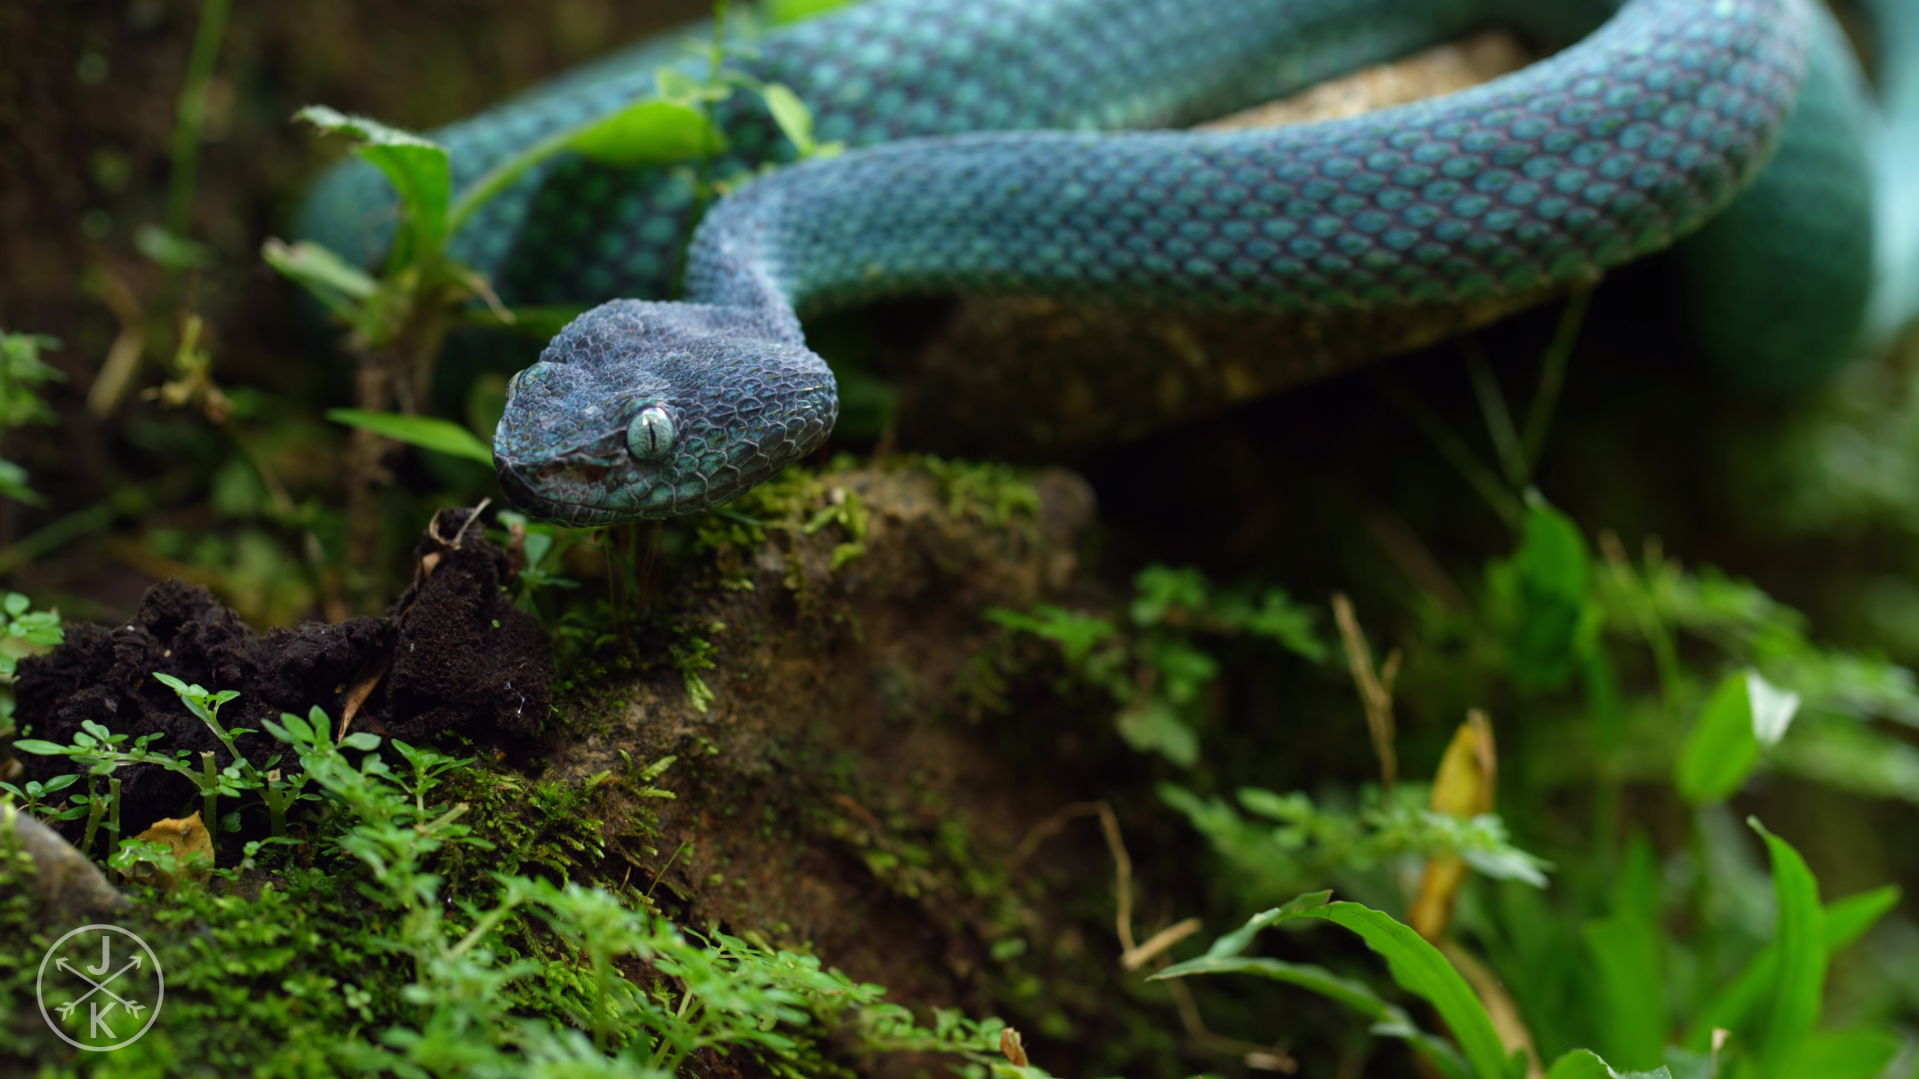 General 1919x1079 reptiles green animals snake